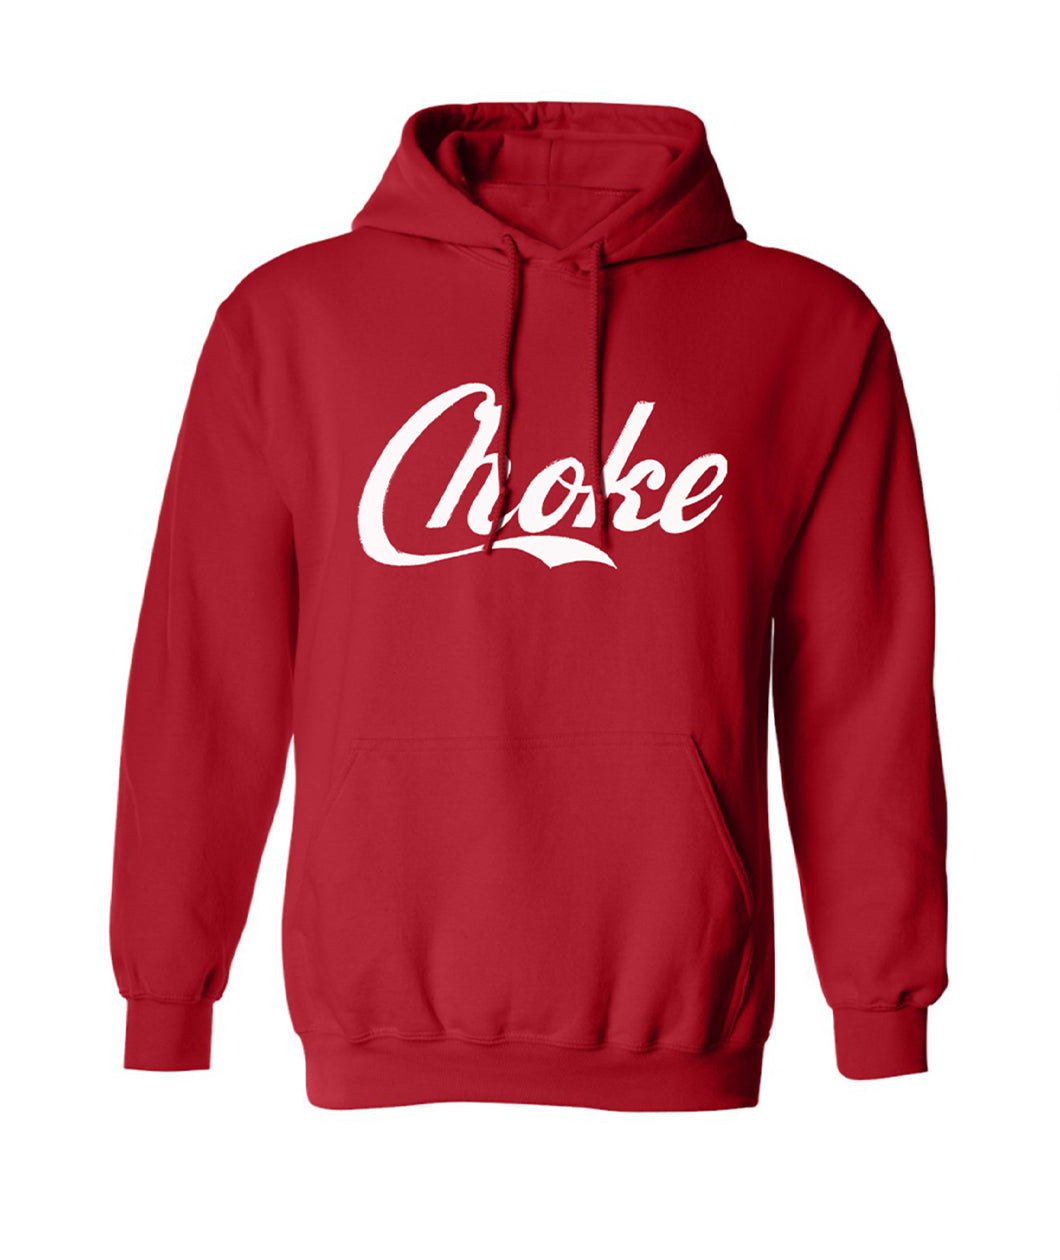 A red hooded sweatshirt with the word, “Choke” in white italicized cursive font with the “C” underlining the rest of the word - from Mars Heyward